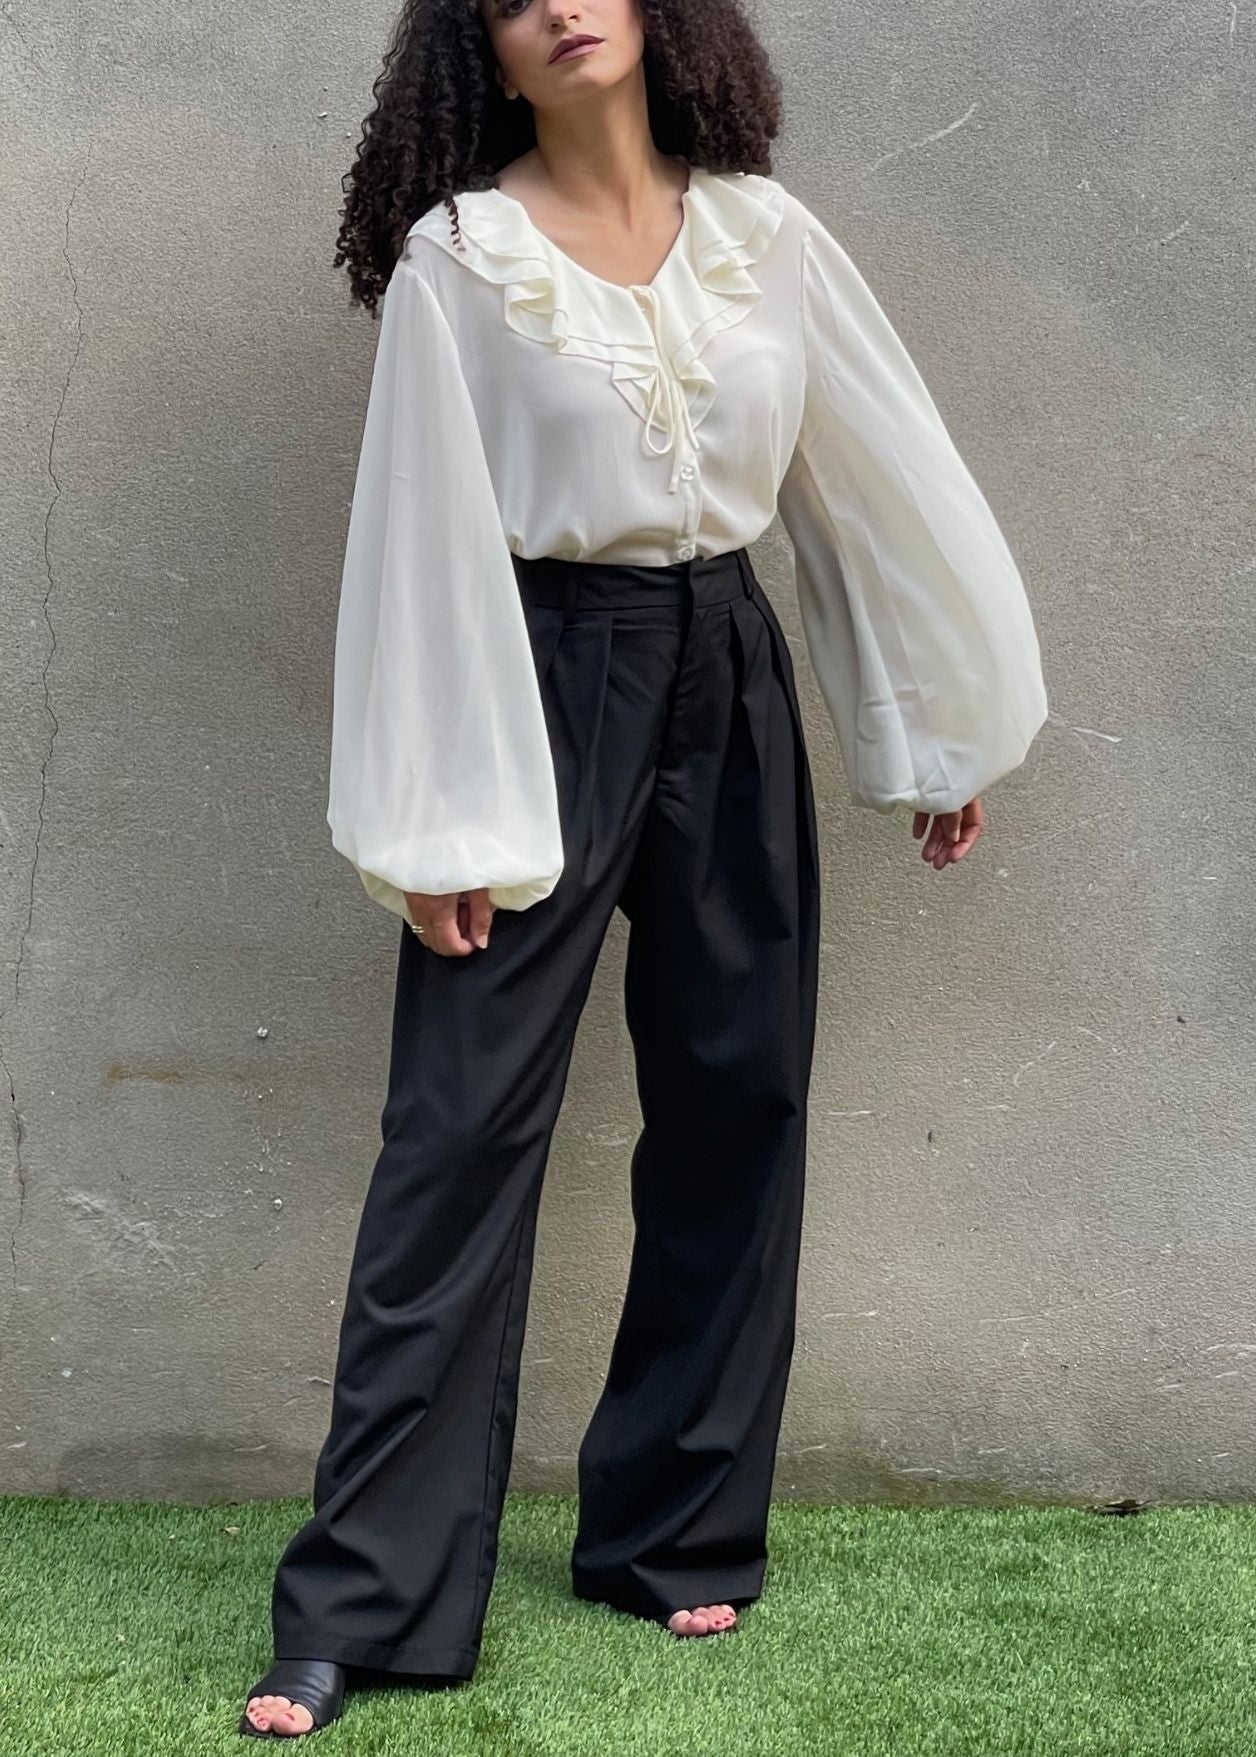 Ruffle Balloon Sleeve Tie Neck Blouse from Blouses collection you can buy now from Fashion And Icon online shop